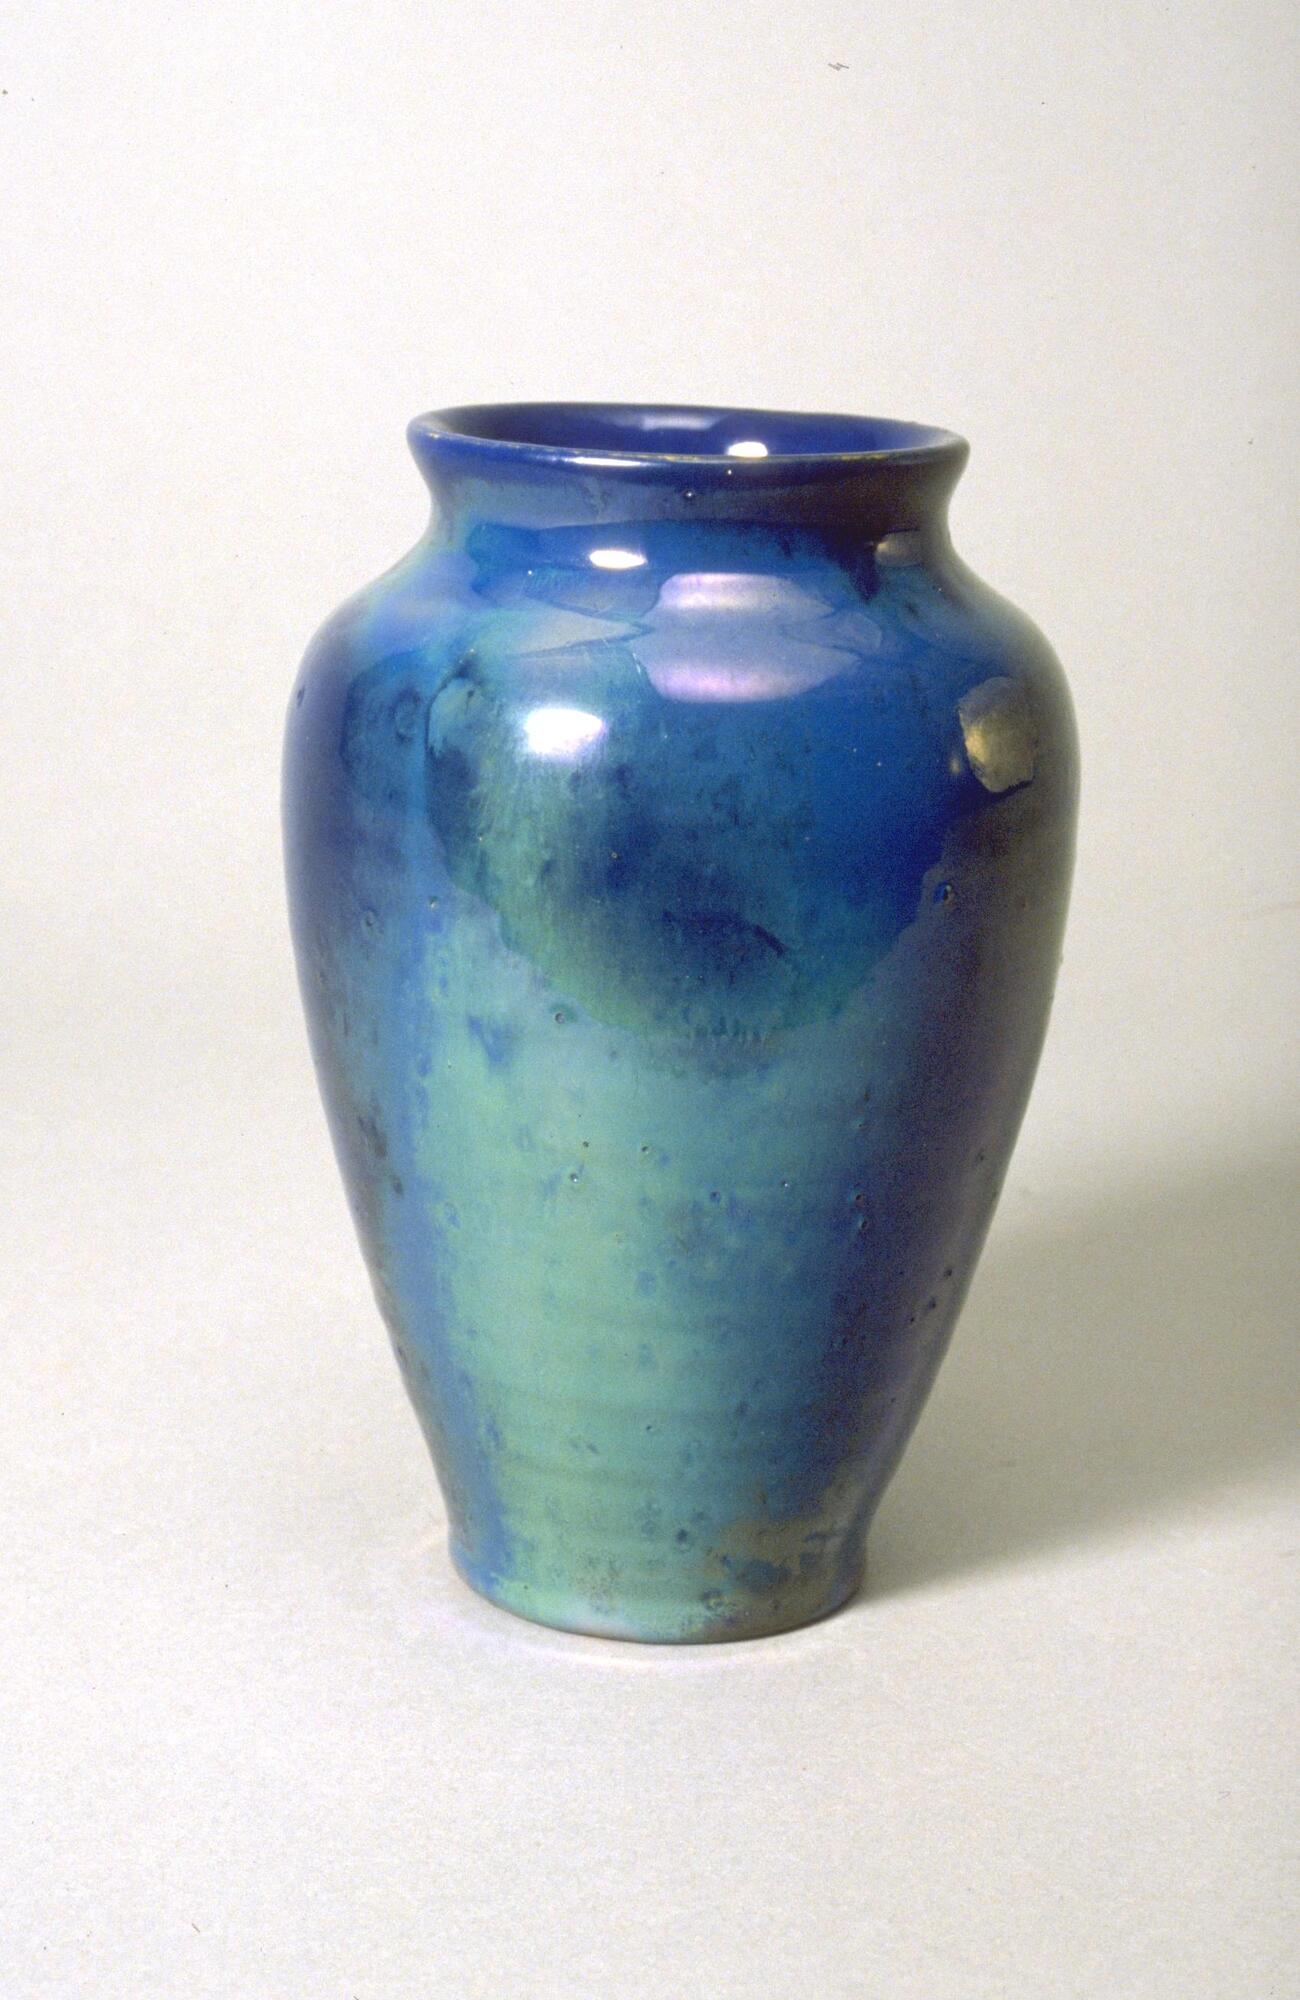 Ceramic vessel with rounded shoulder and wide mouth covered with an iridescent glaze over a semi-matte glaze that creates an appearance of irregular patches of color in shades of blue.  The rings of the thrown clay can be seen beneath the glaze.<br />